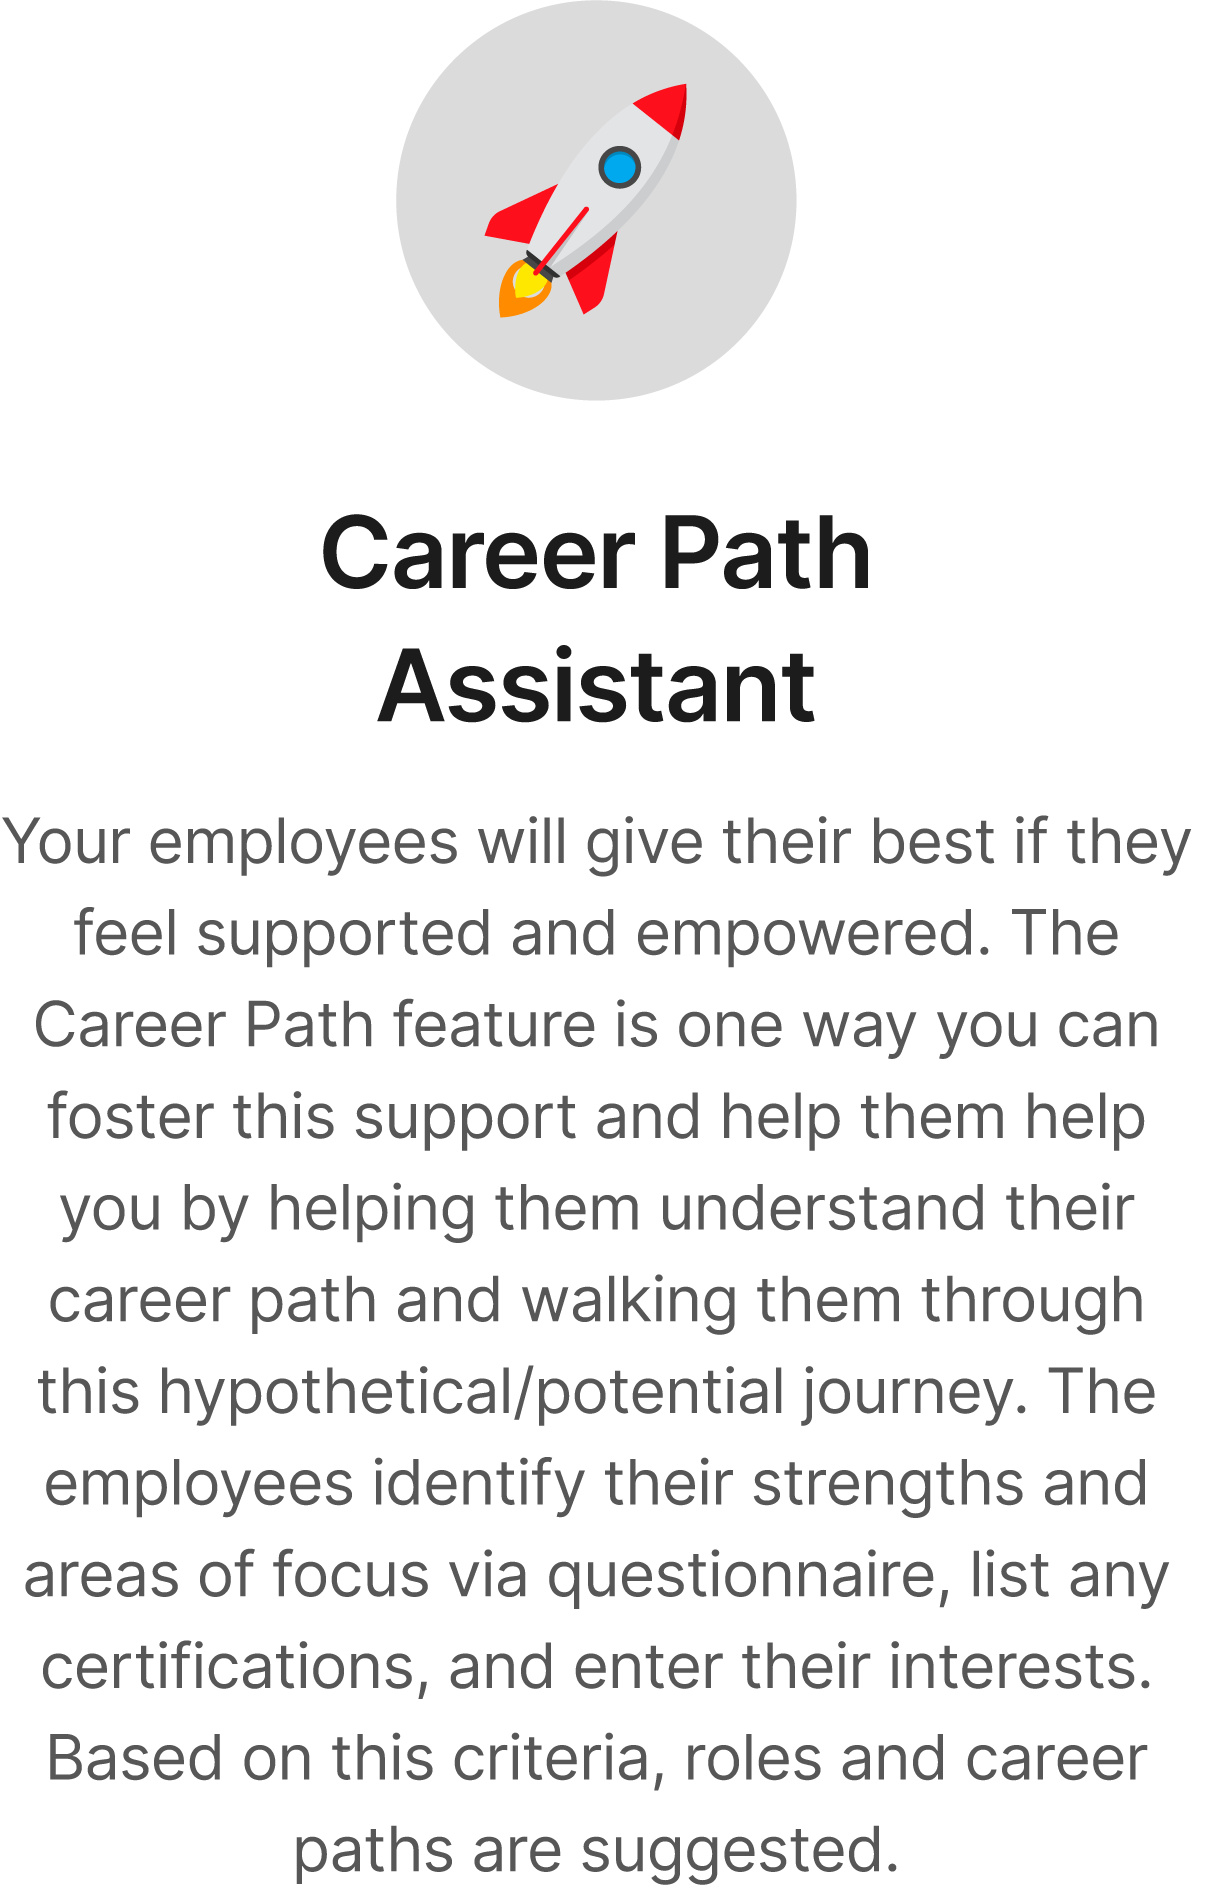 CareerPathAssistant